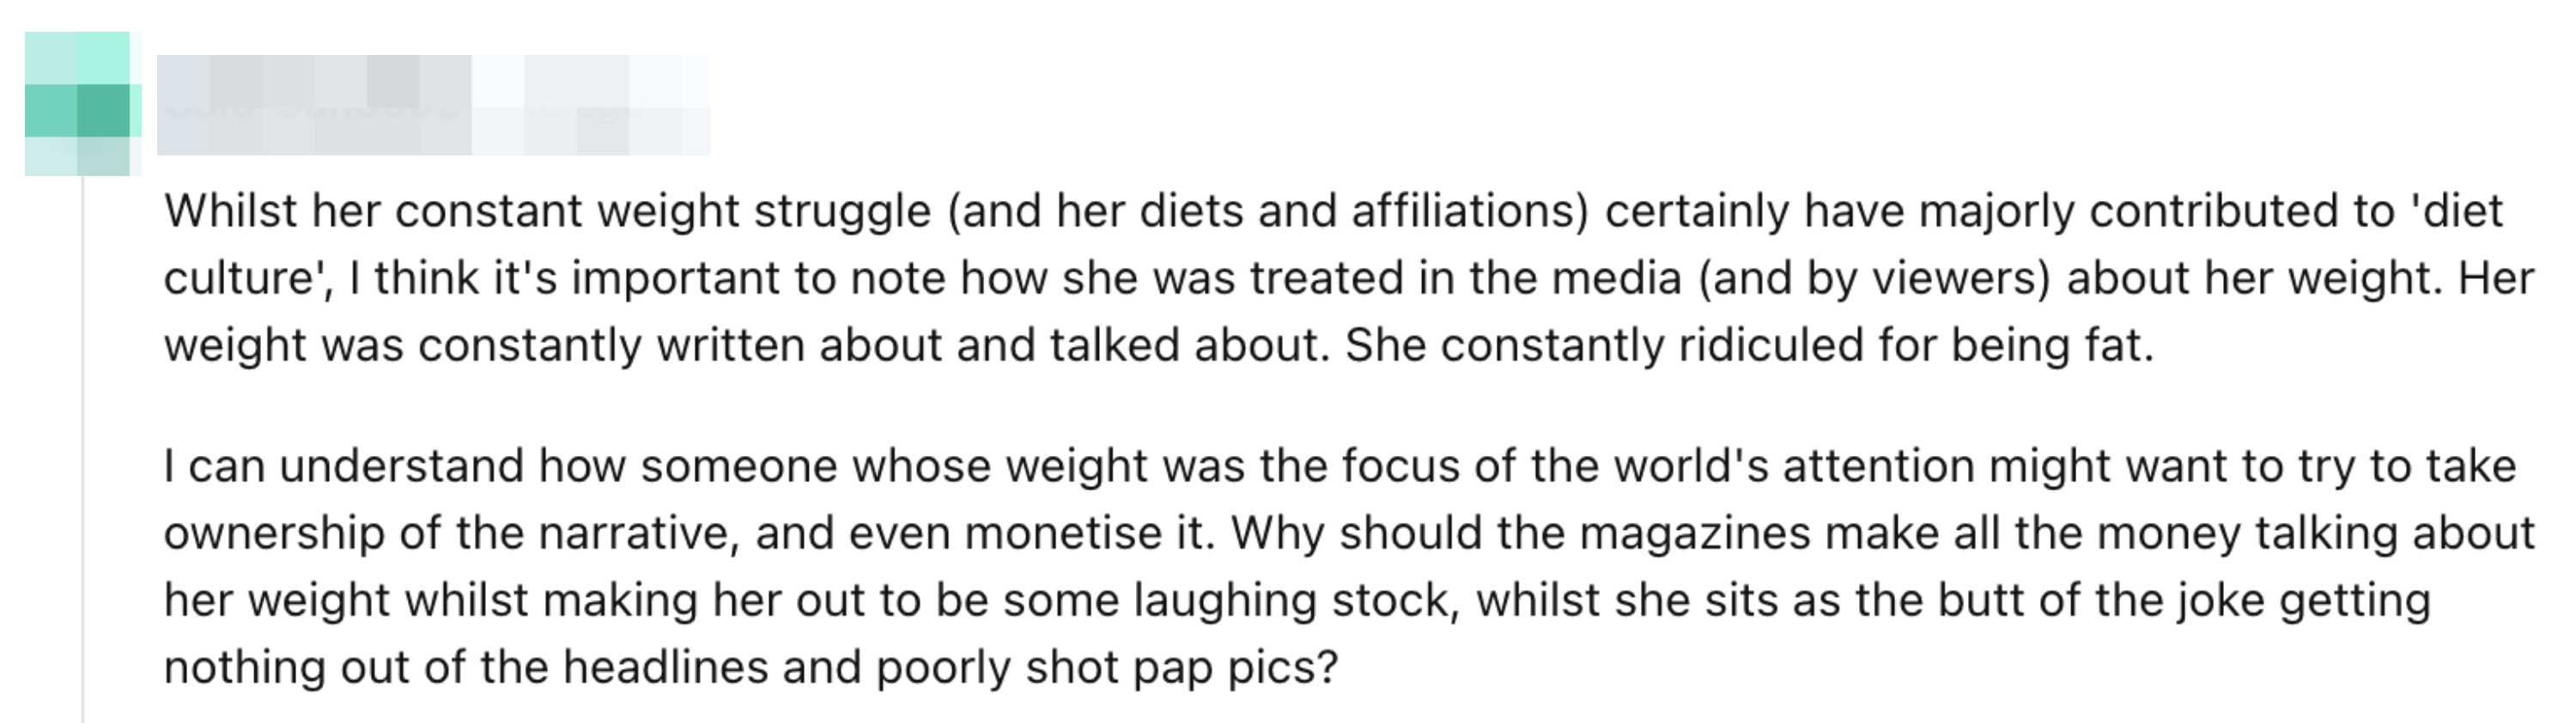 Text from an online forum discussing the media&#x27;s focus on a person&#x27;s weight and its effects